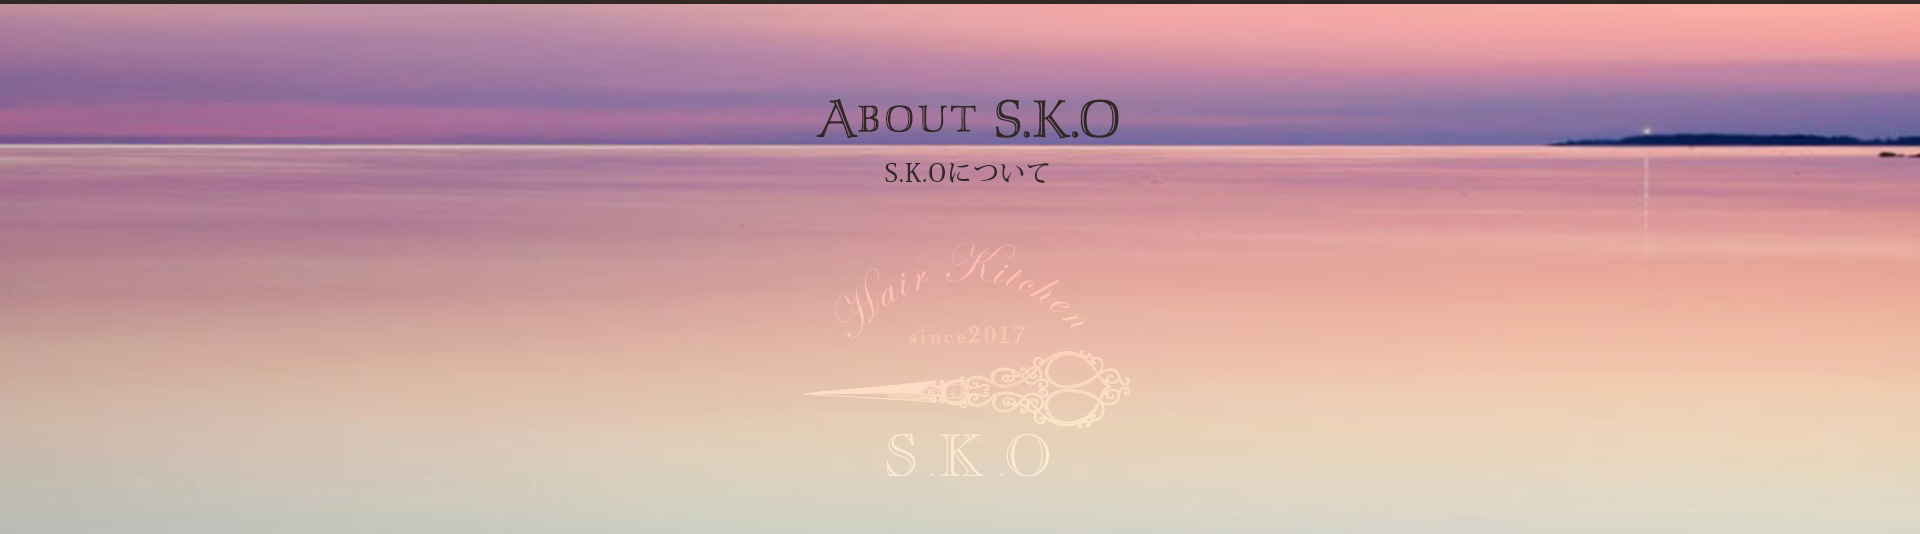 About S.K.O